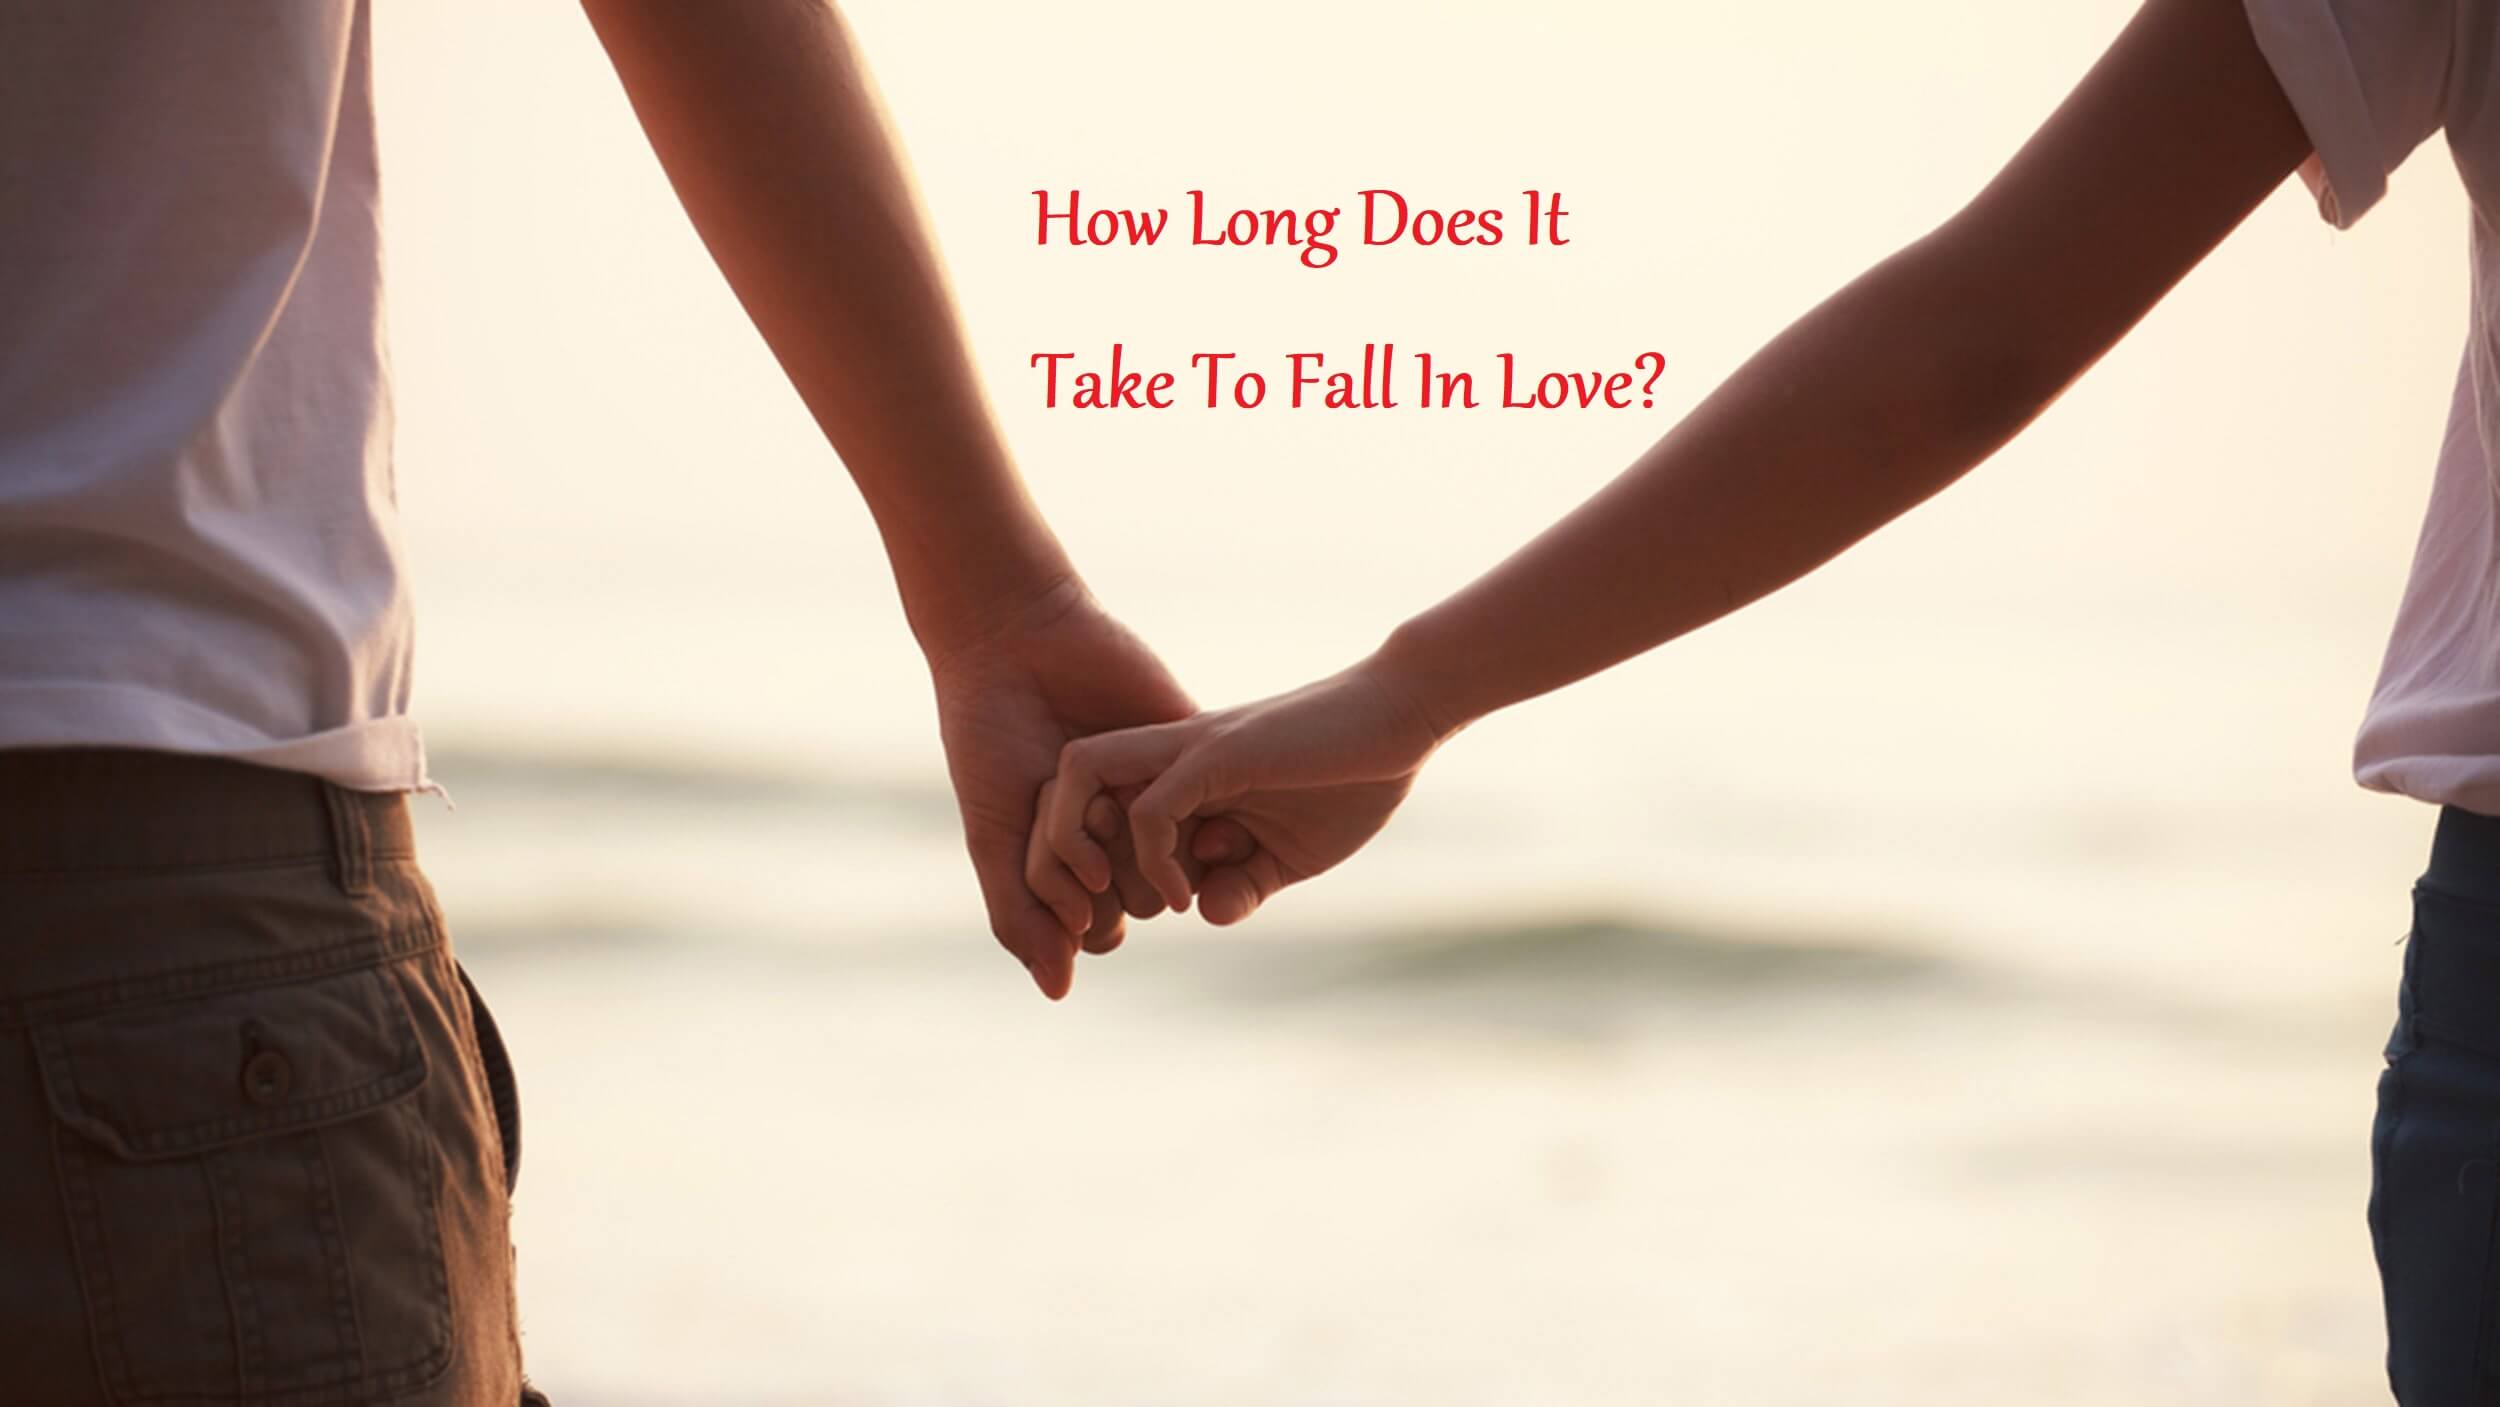 How Long Does It Take To Fall In Love